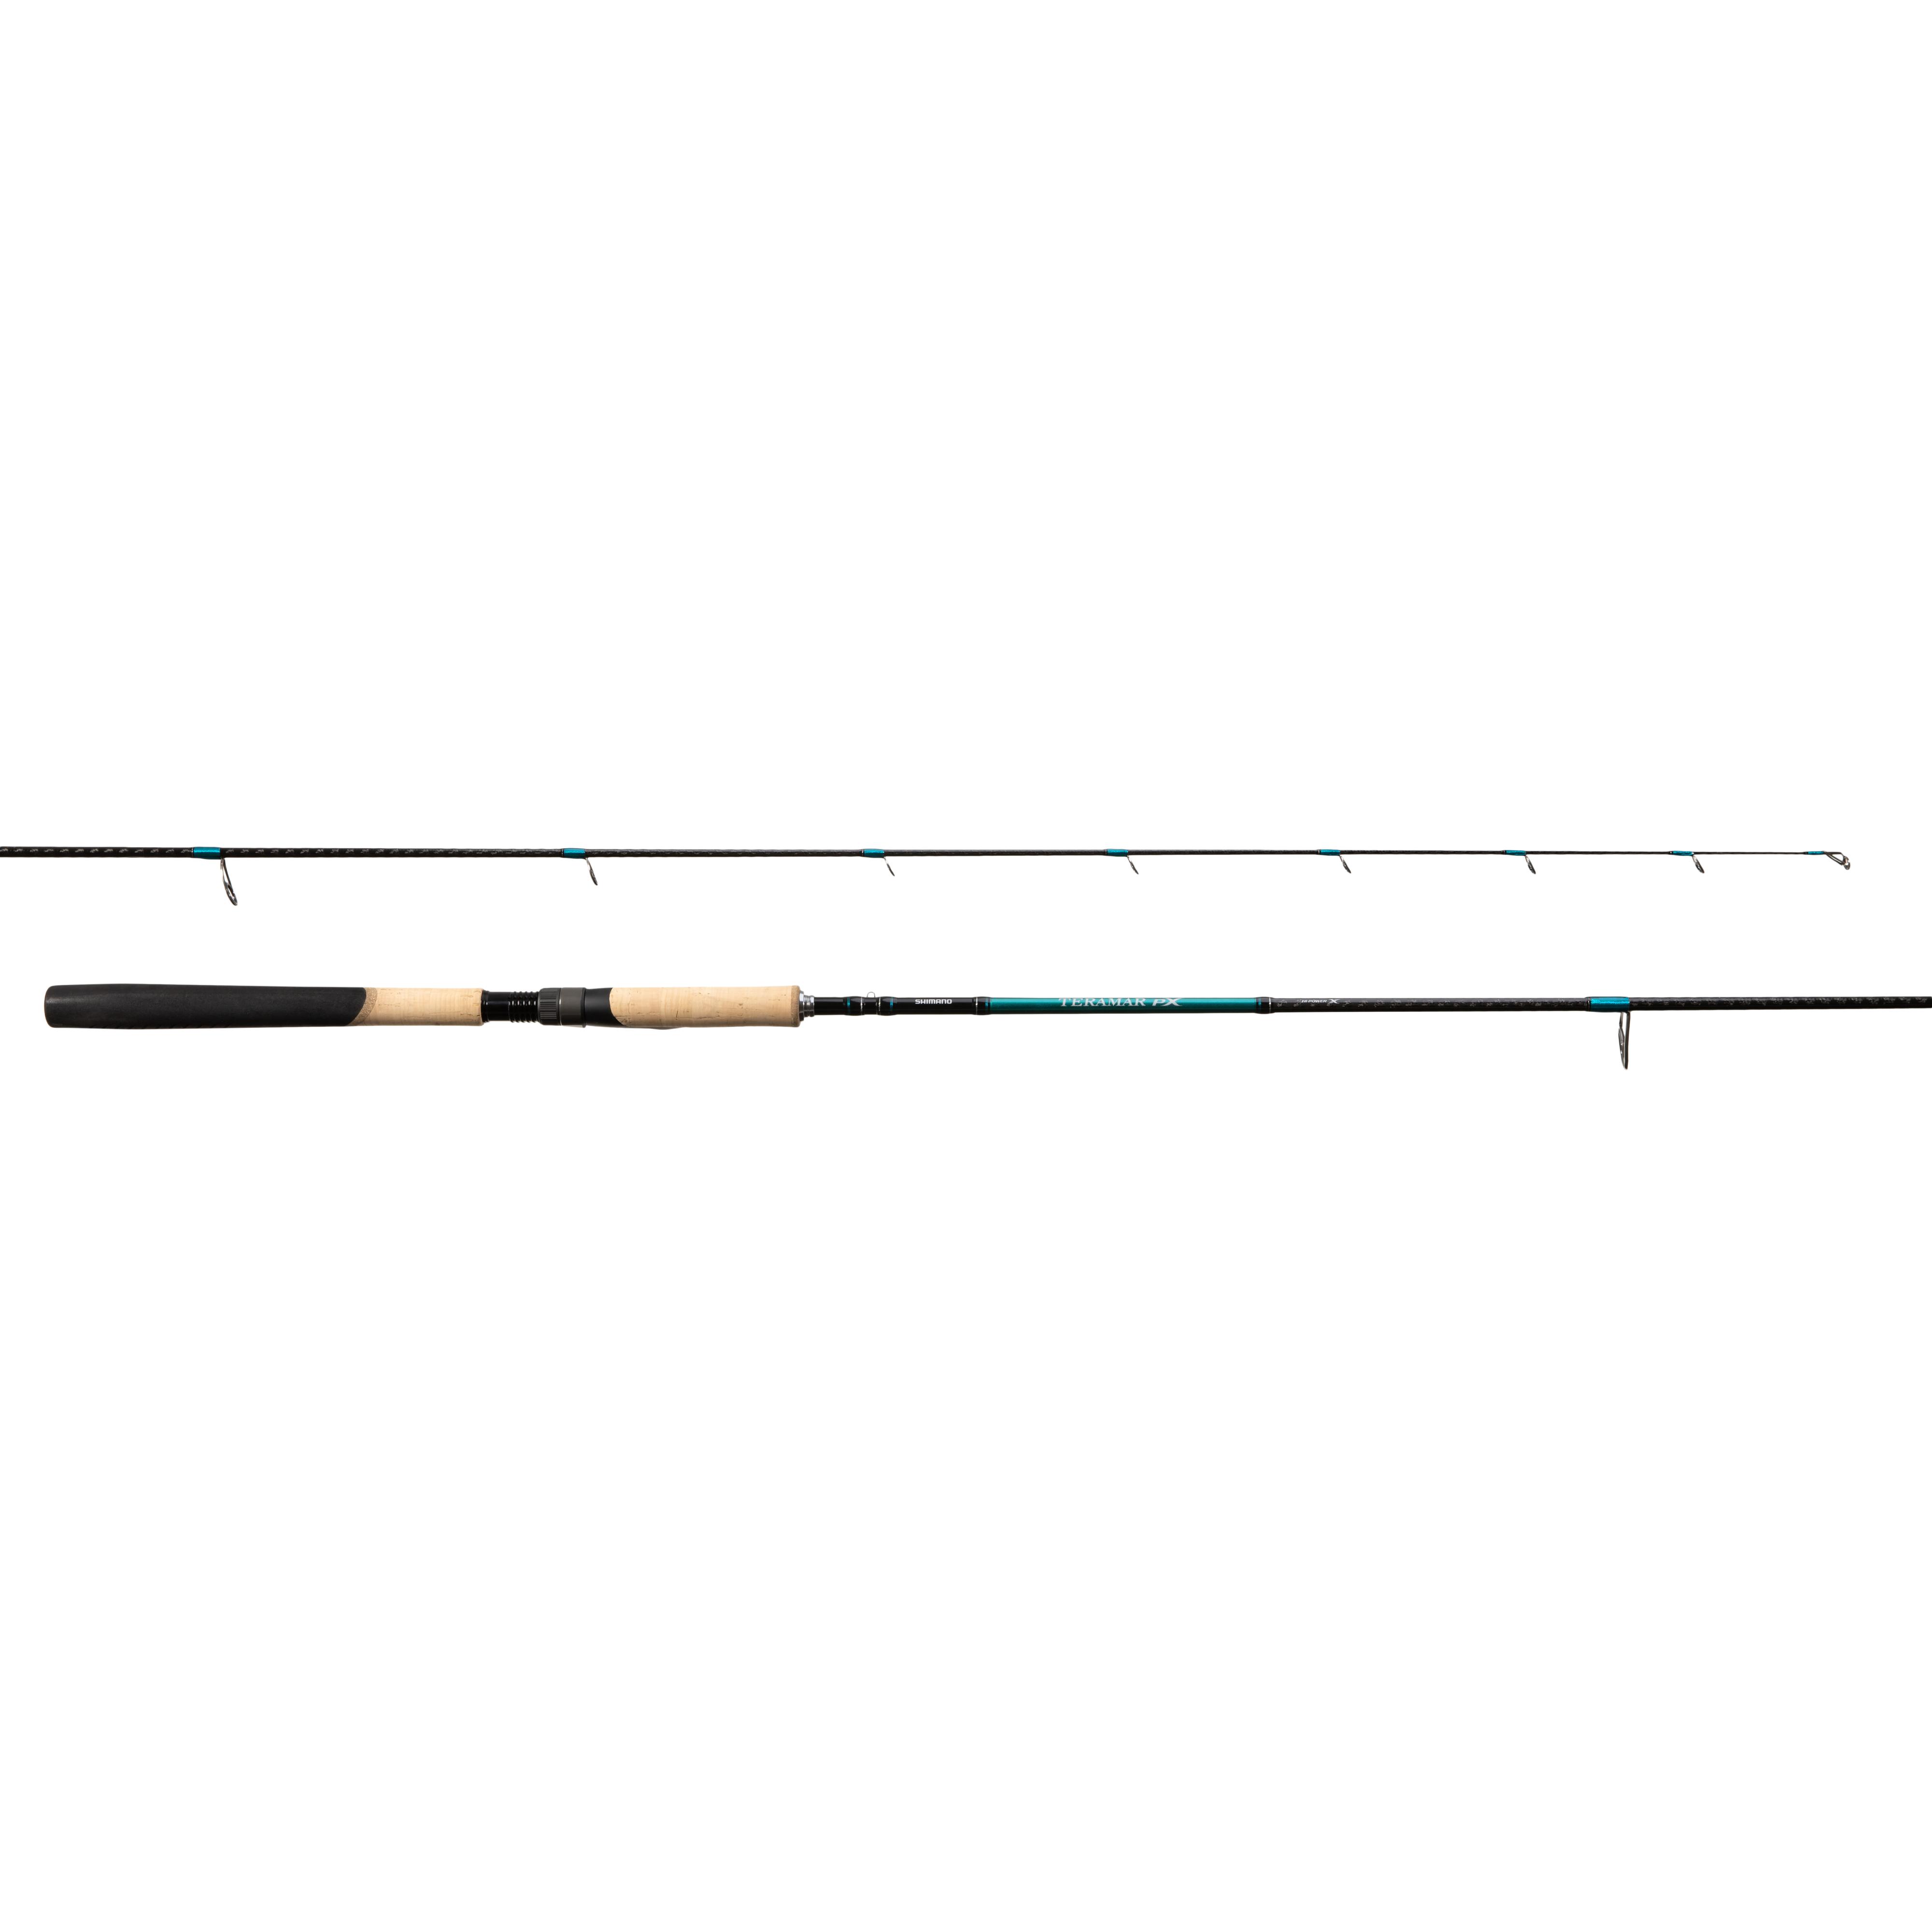 Shakespeare Slingshot Engage TRAVEL 6' 1-3KG 3 Piece SPIN FISHING ROD SP603XL 